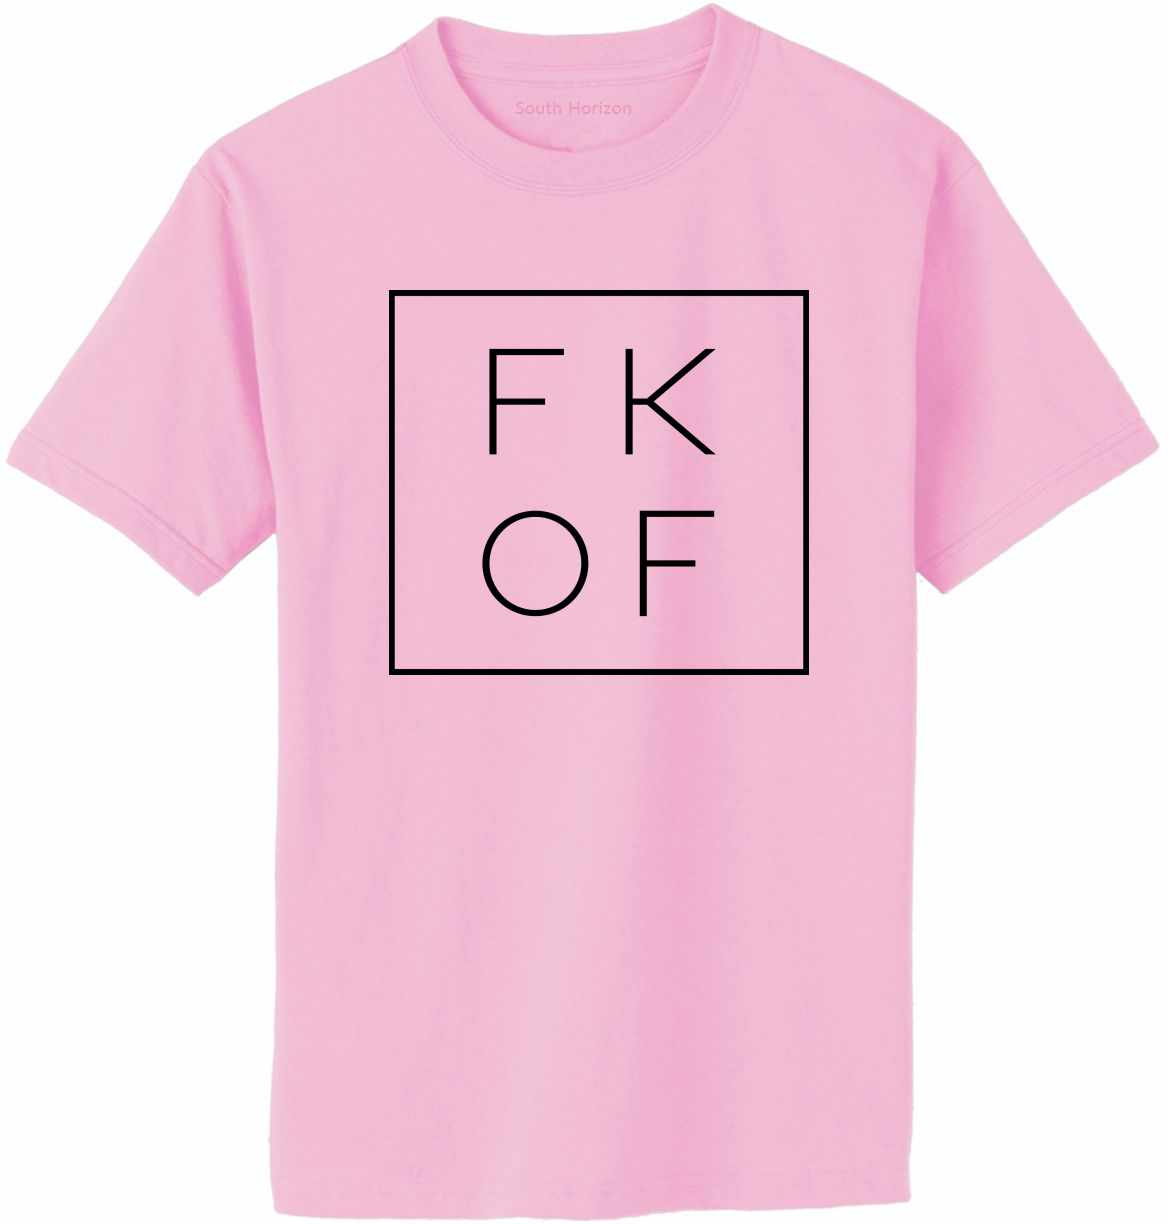 FK OF - Box on Adult T-Shirt (#1253-1)